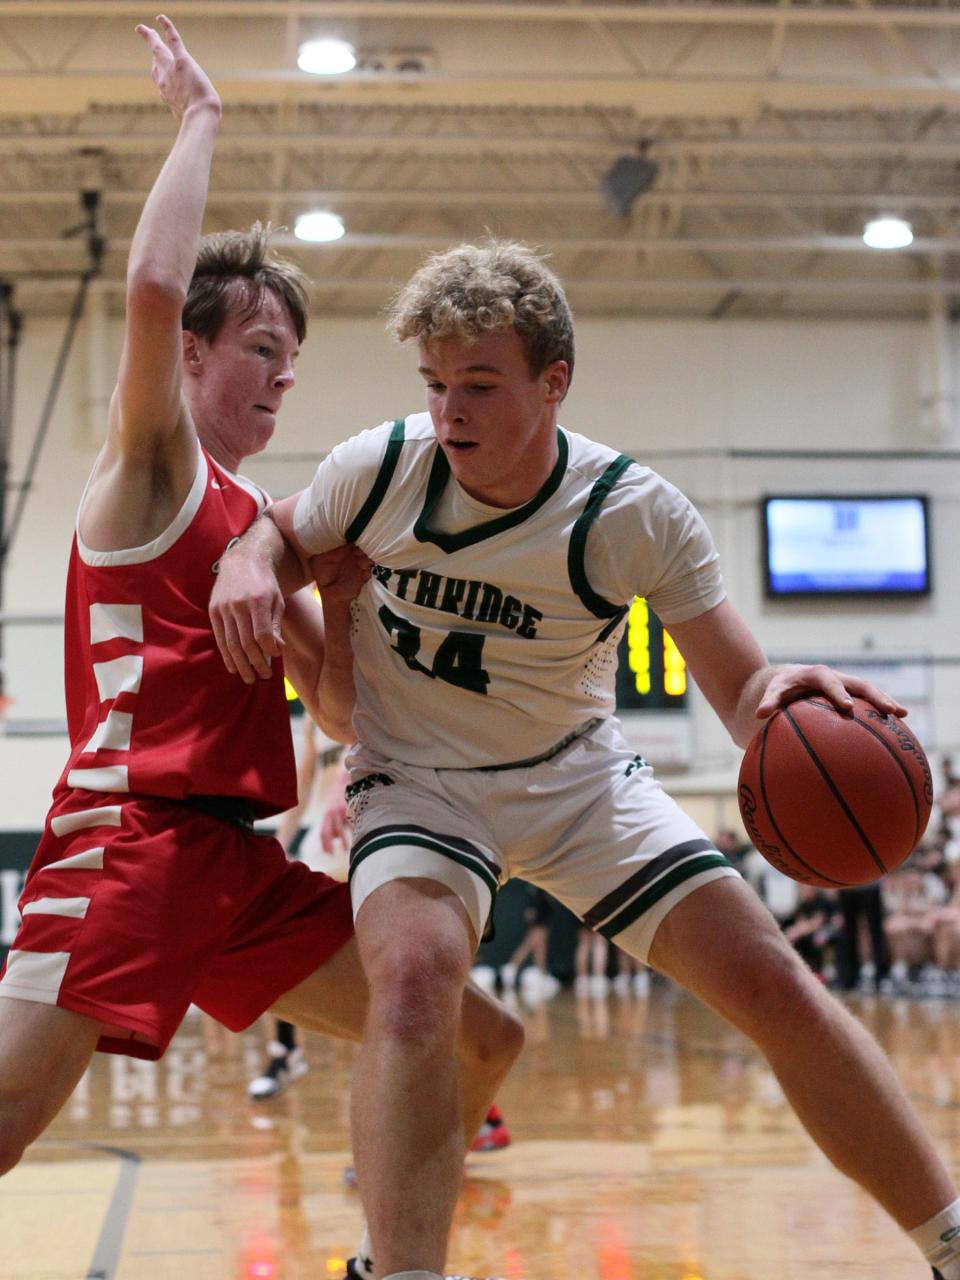 Junior Ethan Payne and his Northridge teammates earned the No. 4 seed in the Division III Central District after winning the Licking County League-Cardinal Division title, the program's first league championship.